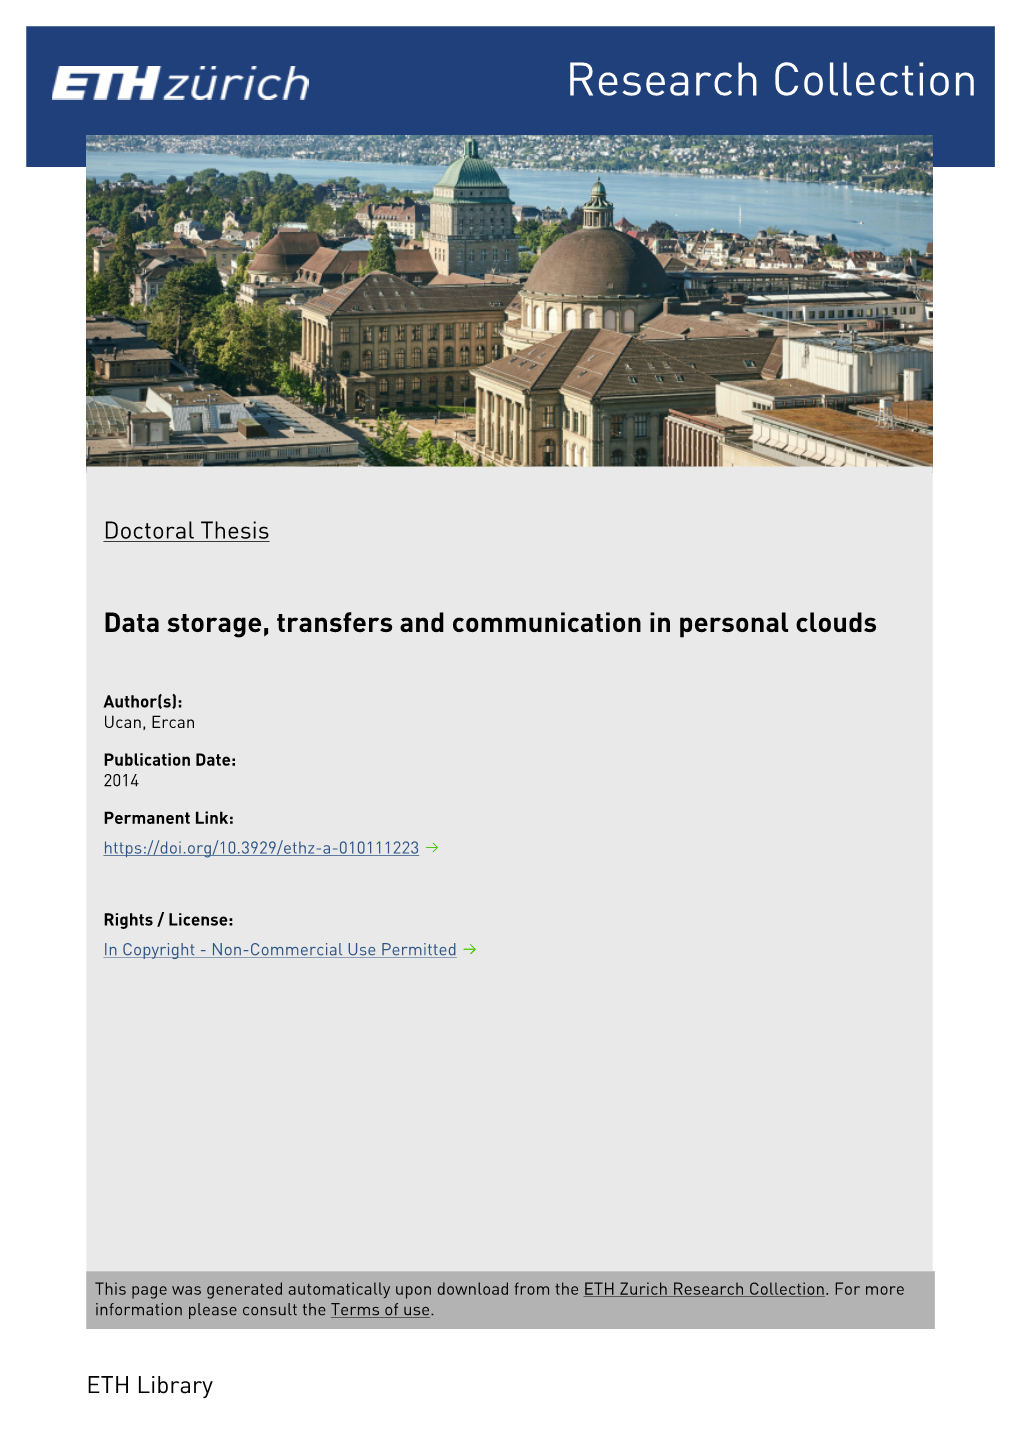 Data Storage, Transfers and Communication in Personal Clouds